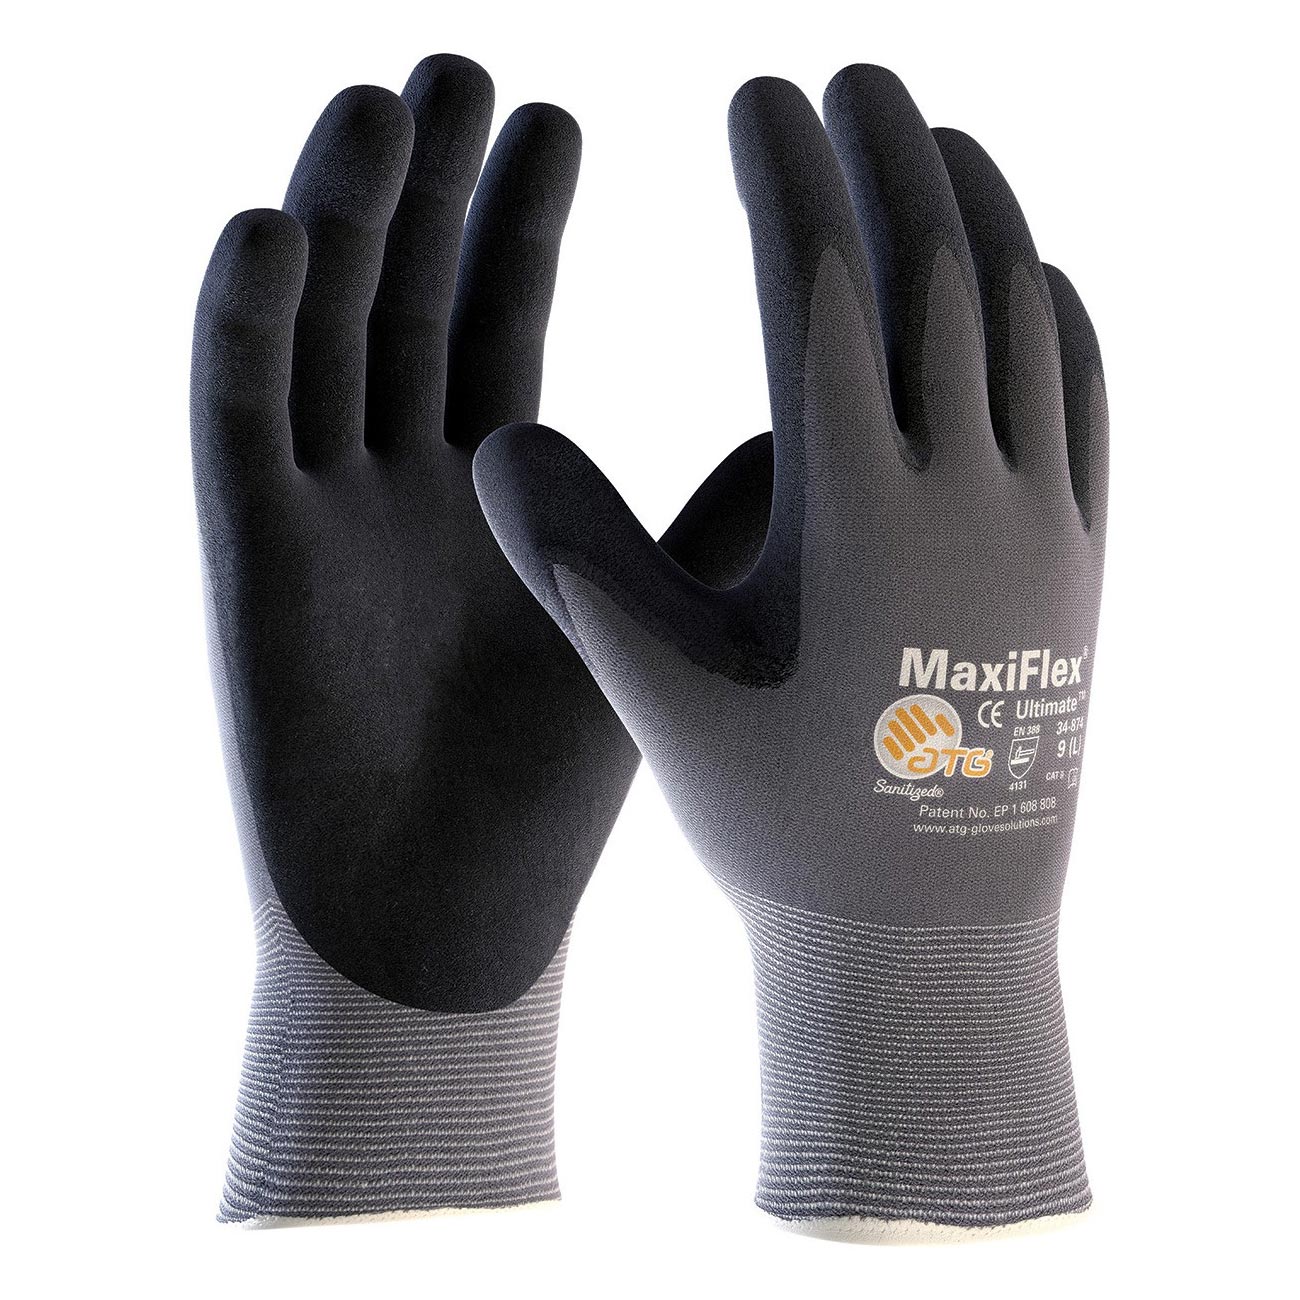 PIP 34-874 MaxiFlex Ultimate Seamless Knit Nylon/Lycra Gloves - Nitrile Coated Micro - Foam Grip on Palm & Fingers (DZ)-eSafety Supplies, Inc